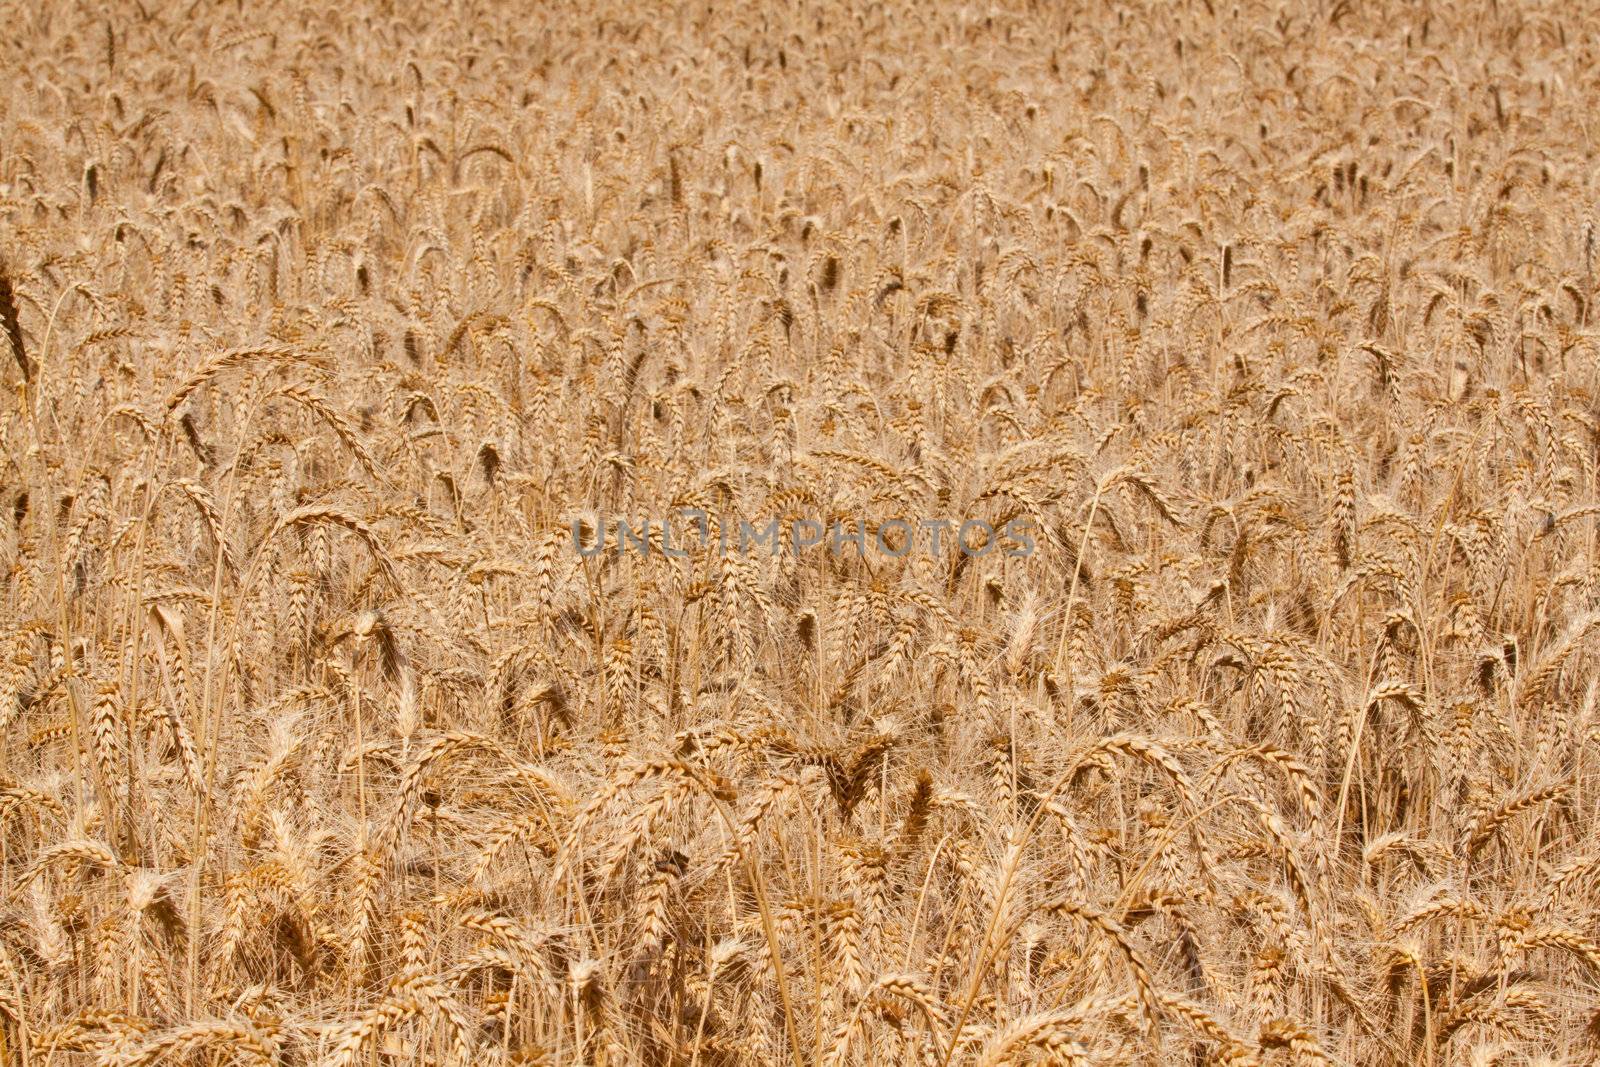 A closeup shot of a wheat field ready to be harvested.